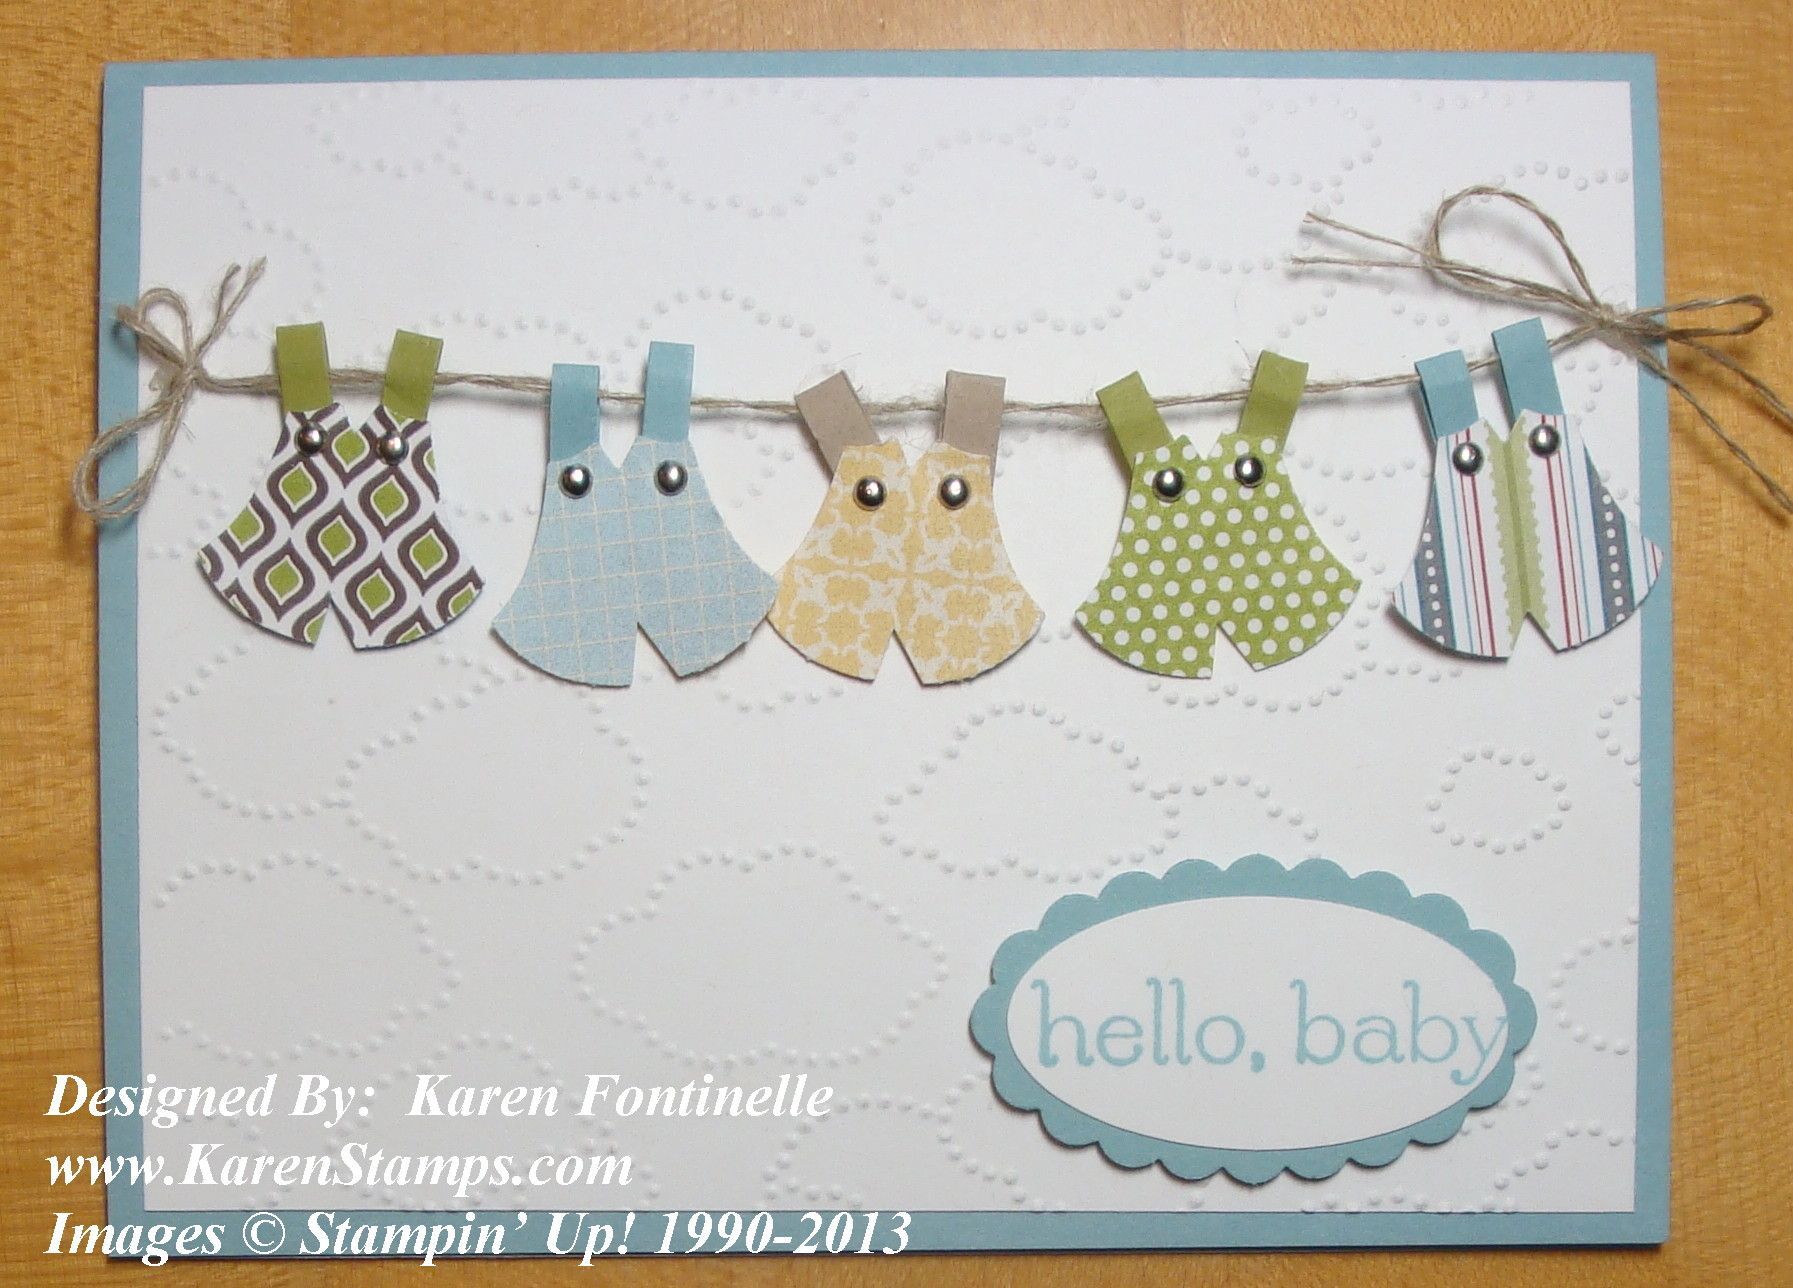 Owl-Punch-Baby-Boy-Card.jpg 1,7931,288 pixels – going to take me a minute to figure this one